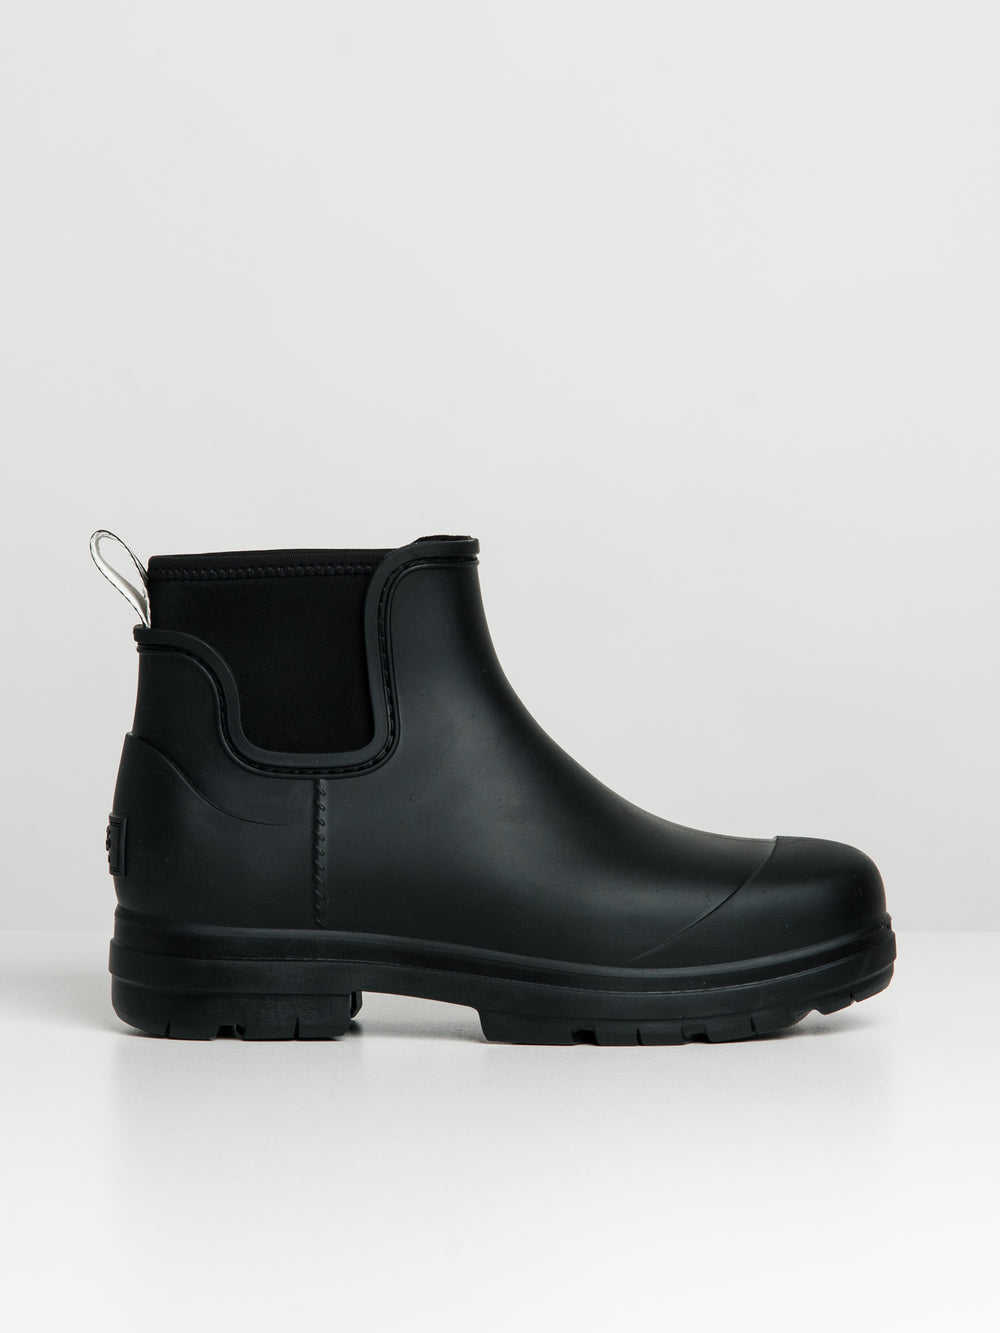 WOMENS UGG DROPLET BOOT